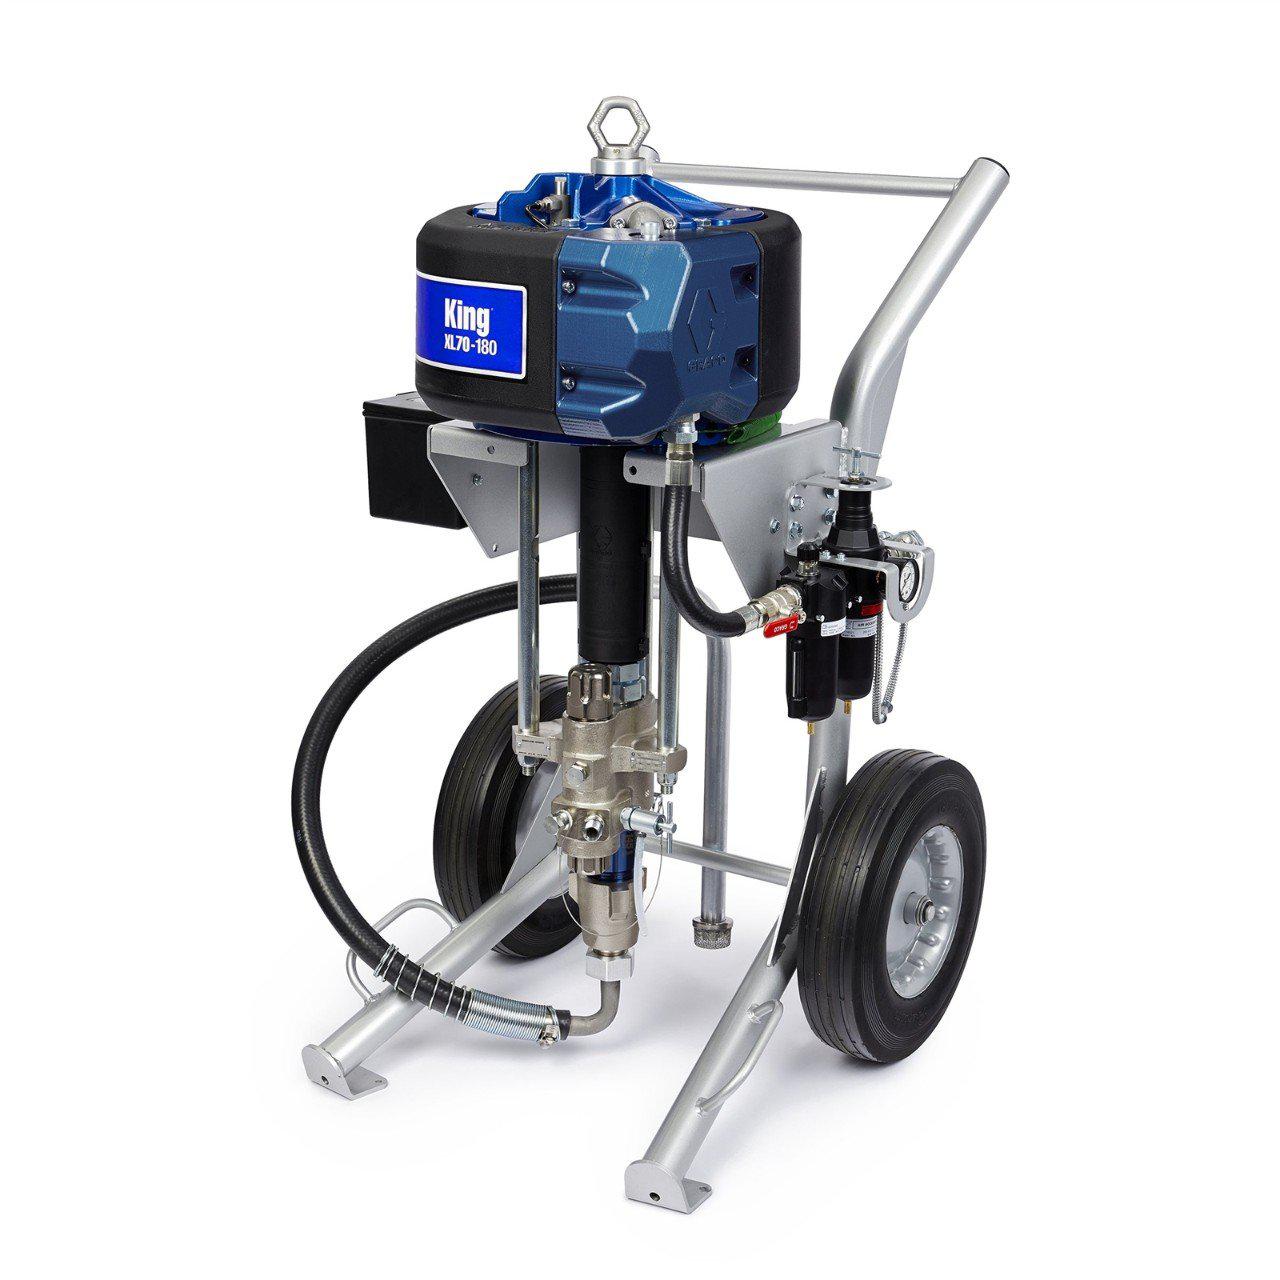 Airless Paint Sprayers, Air Compressors, Parts, Accessories, Service and  Information